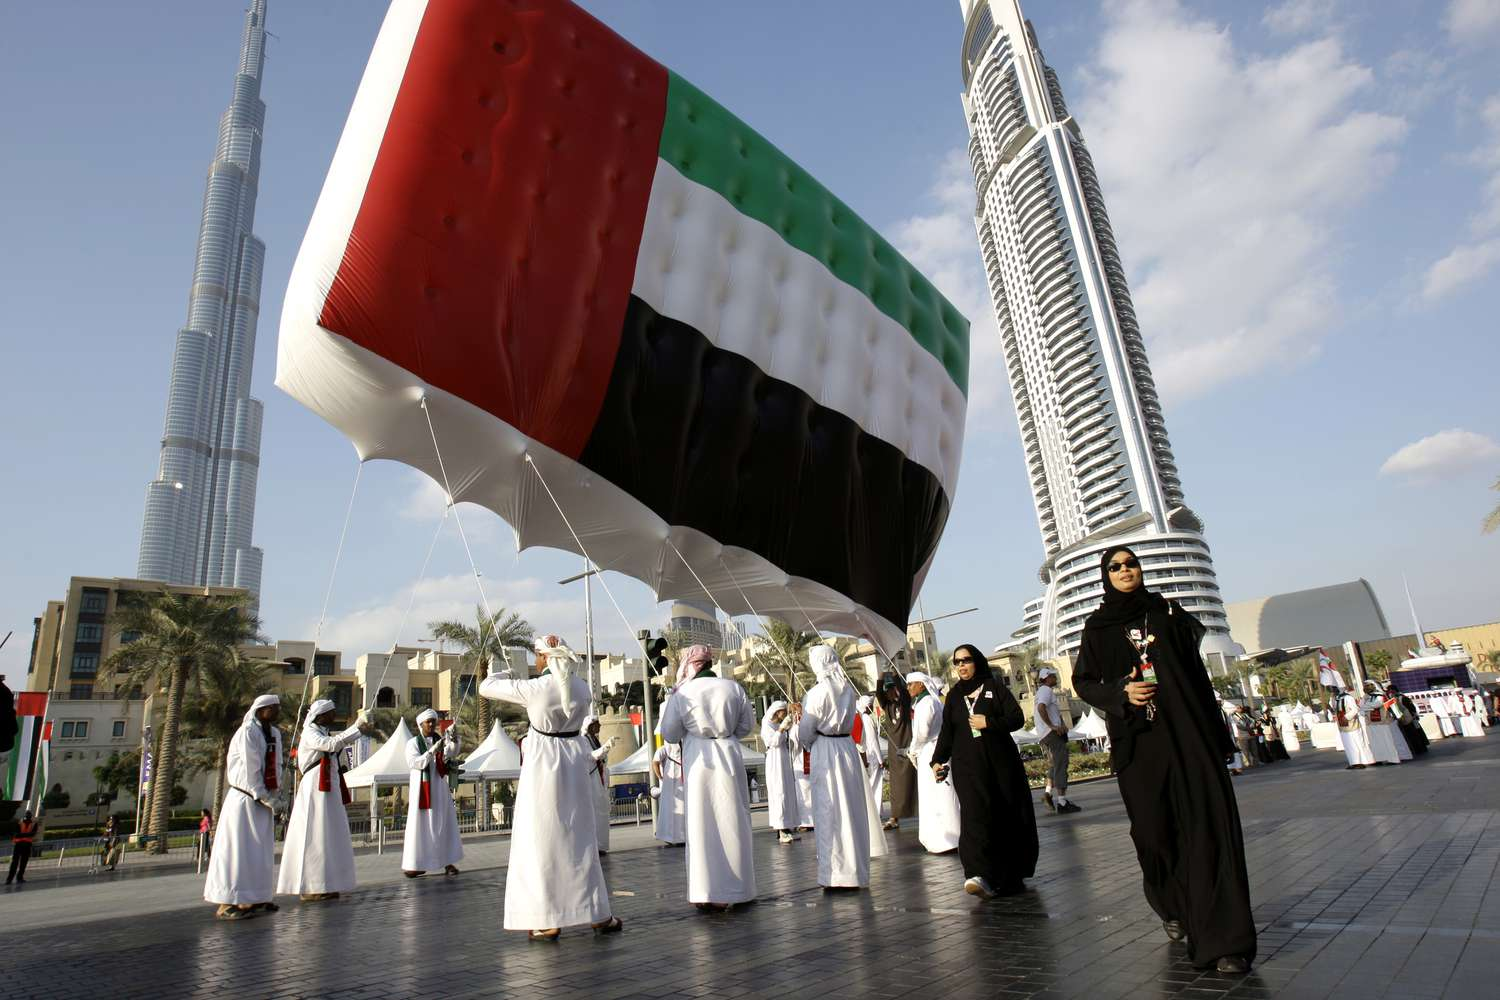 UAE’s Travel & Tourism sector to expand, creating 23,500 jobs this year